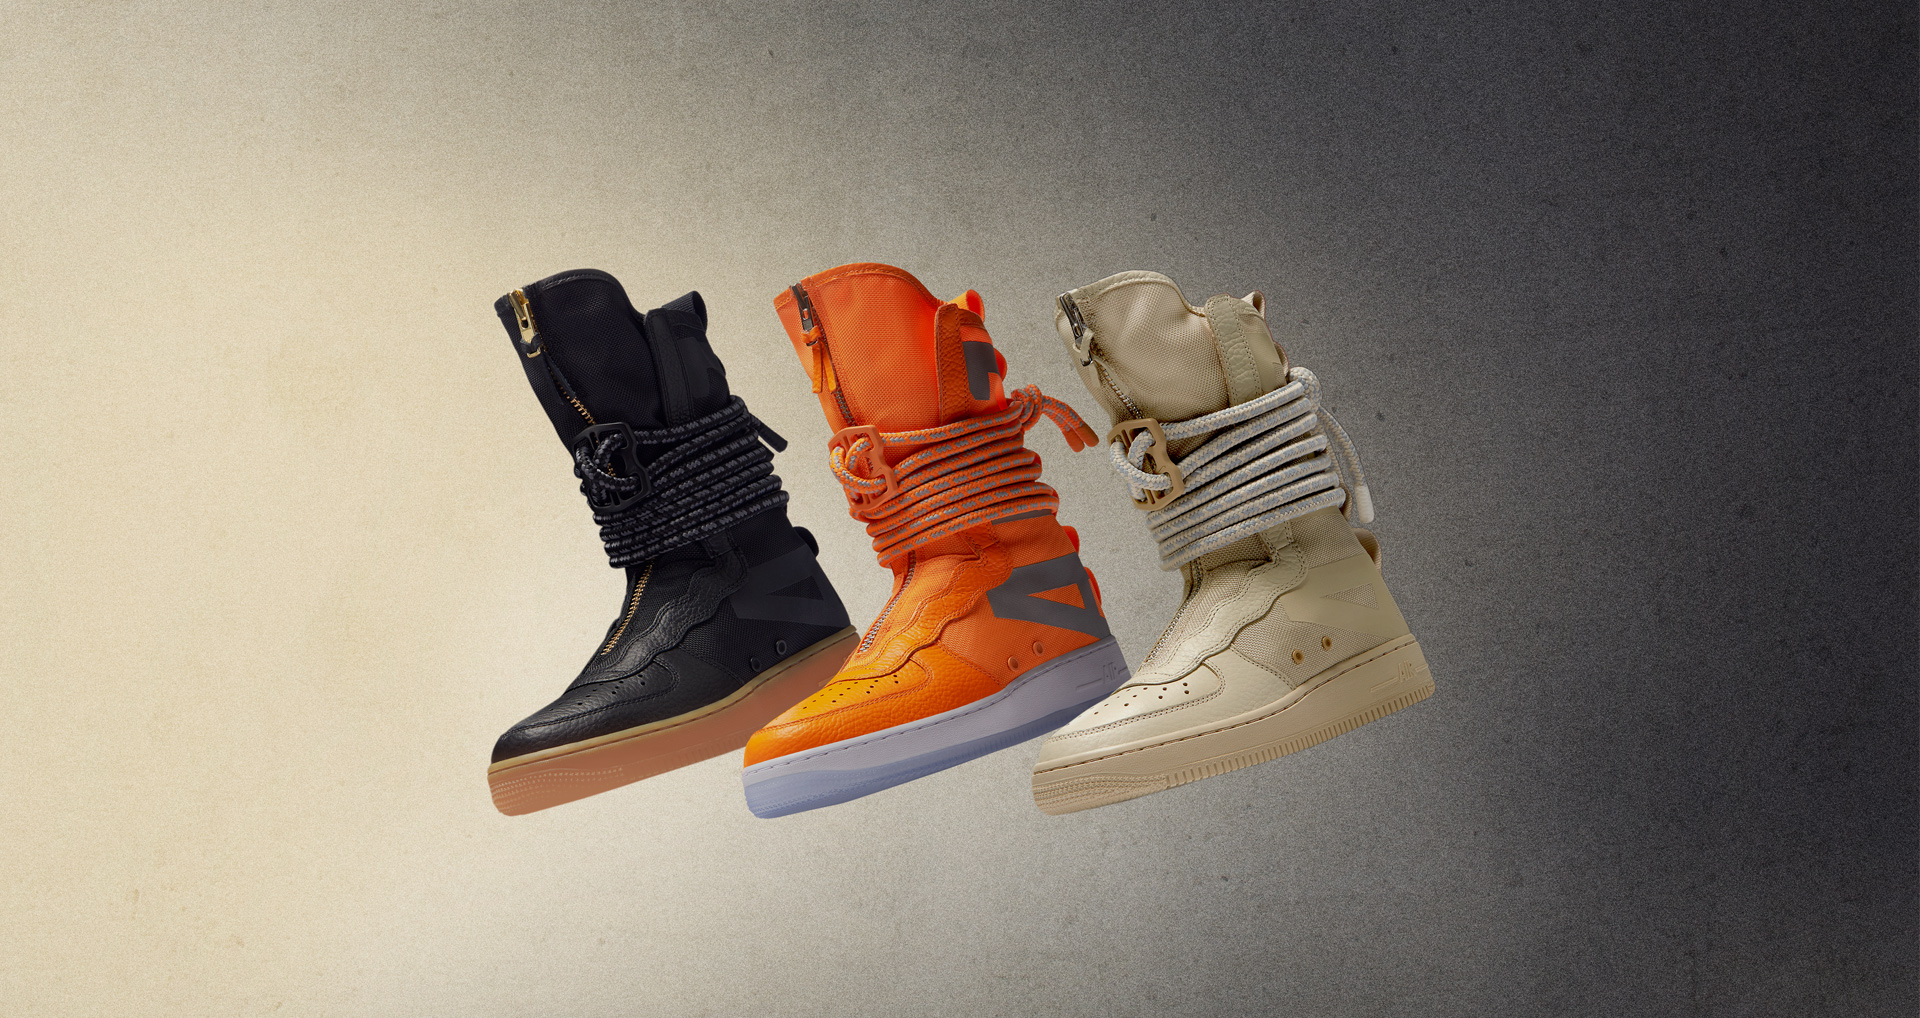 New SF AF1 High Builds Celebrate 35 Years the Air Force 1 - WearTesters